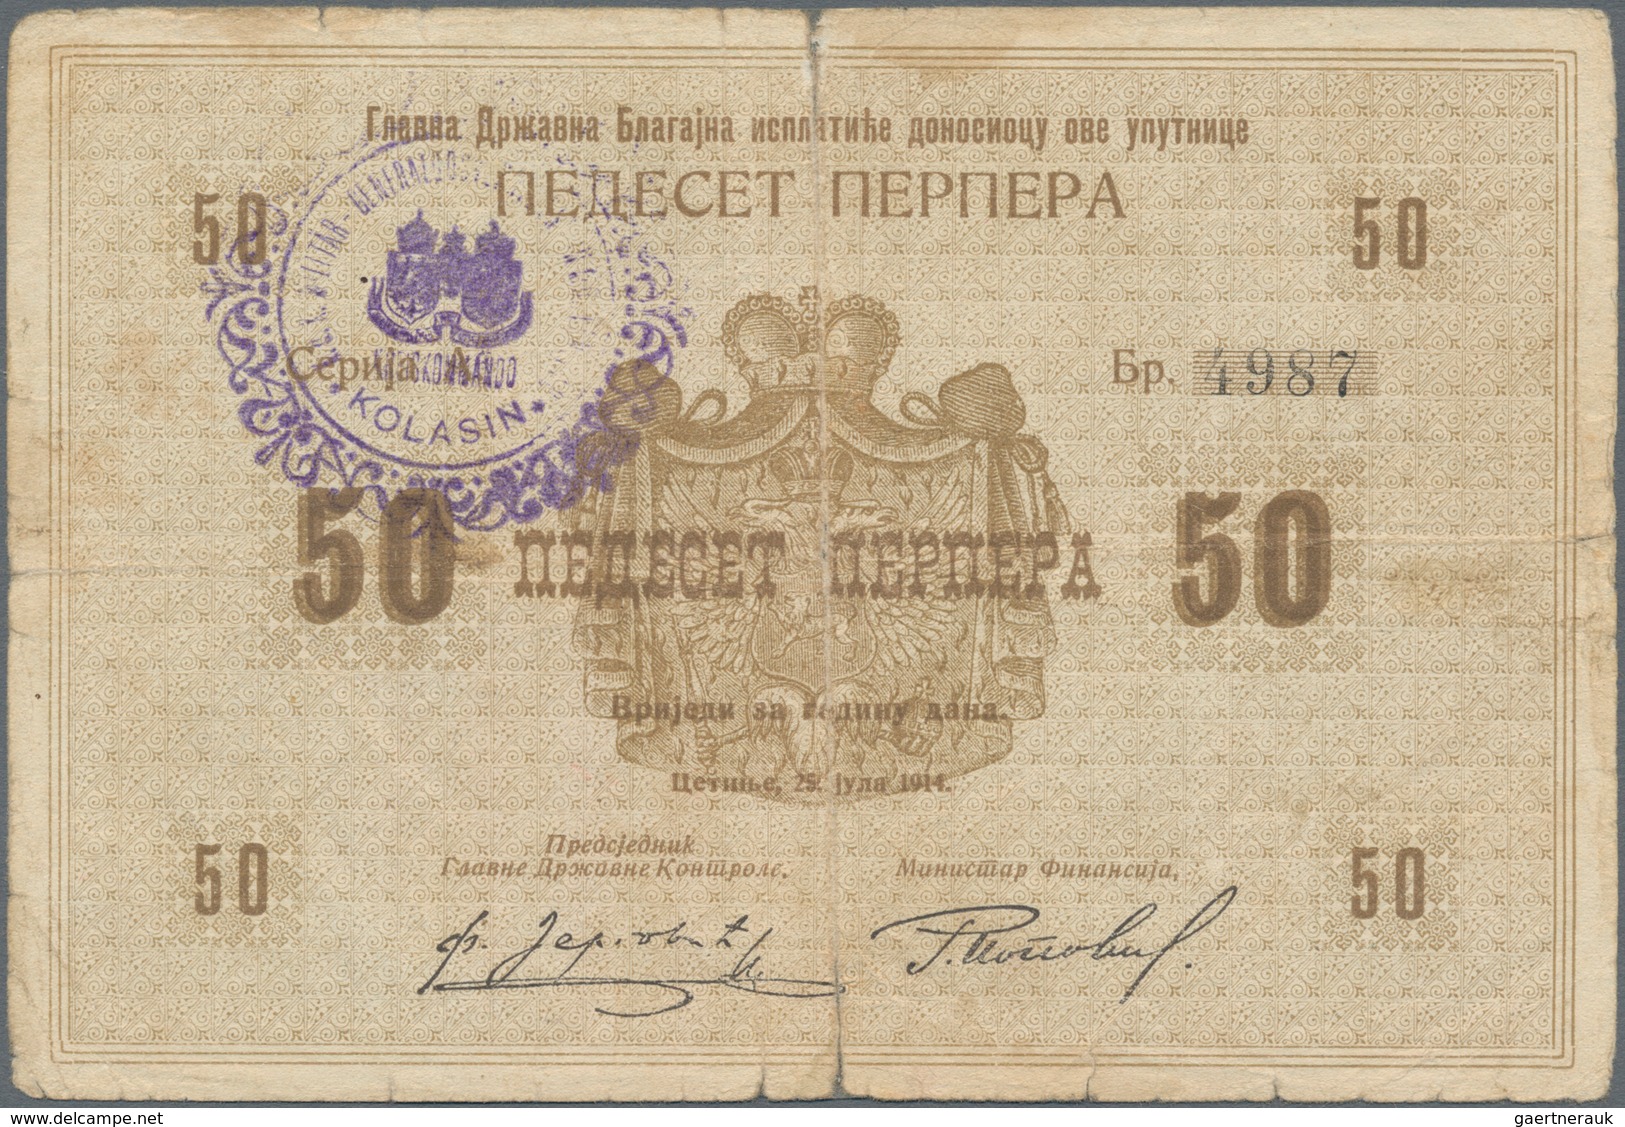 Montenegro: Military Government District Command set with 6 banknotes comprising 10 Perpera 1914 (19